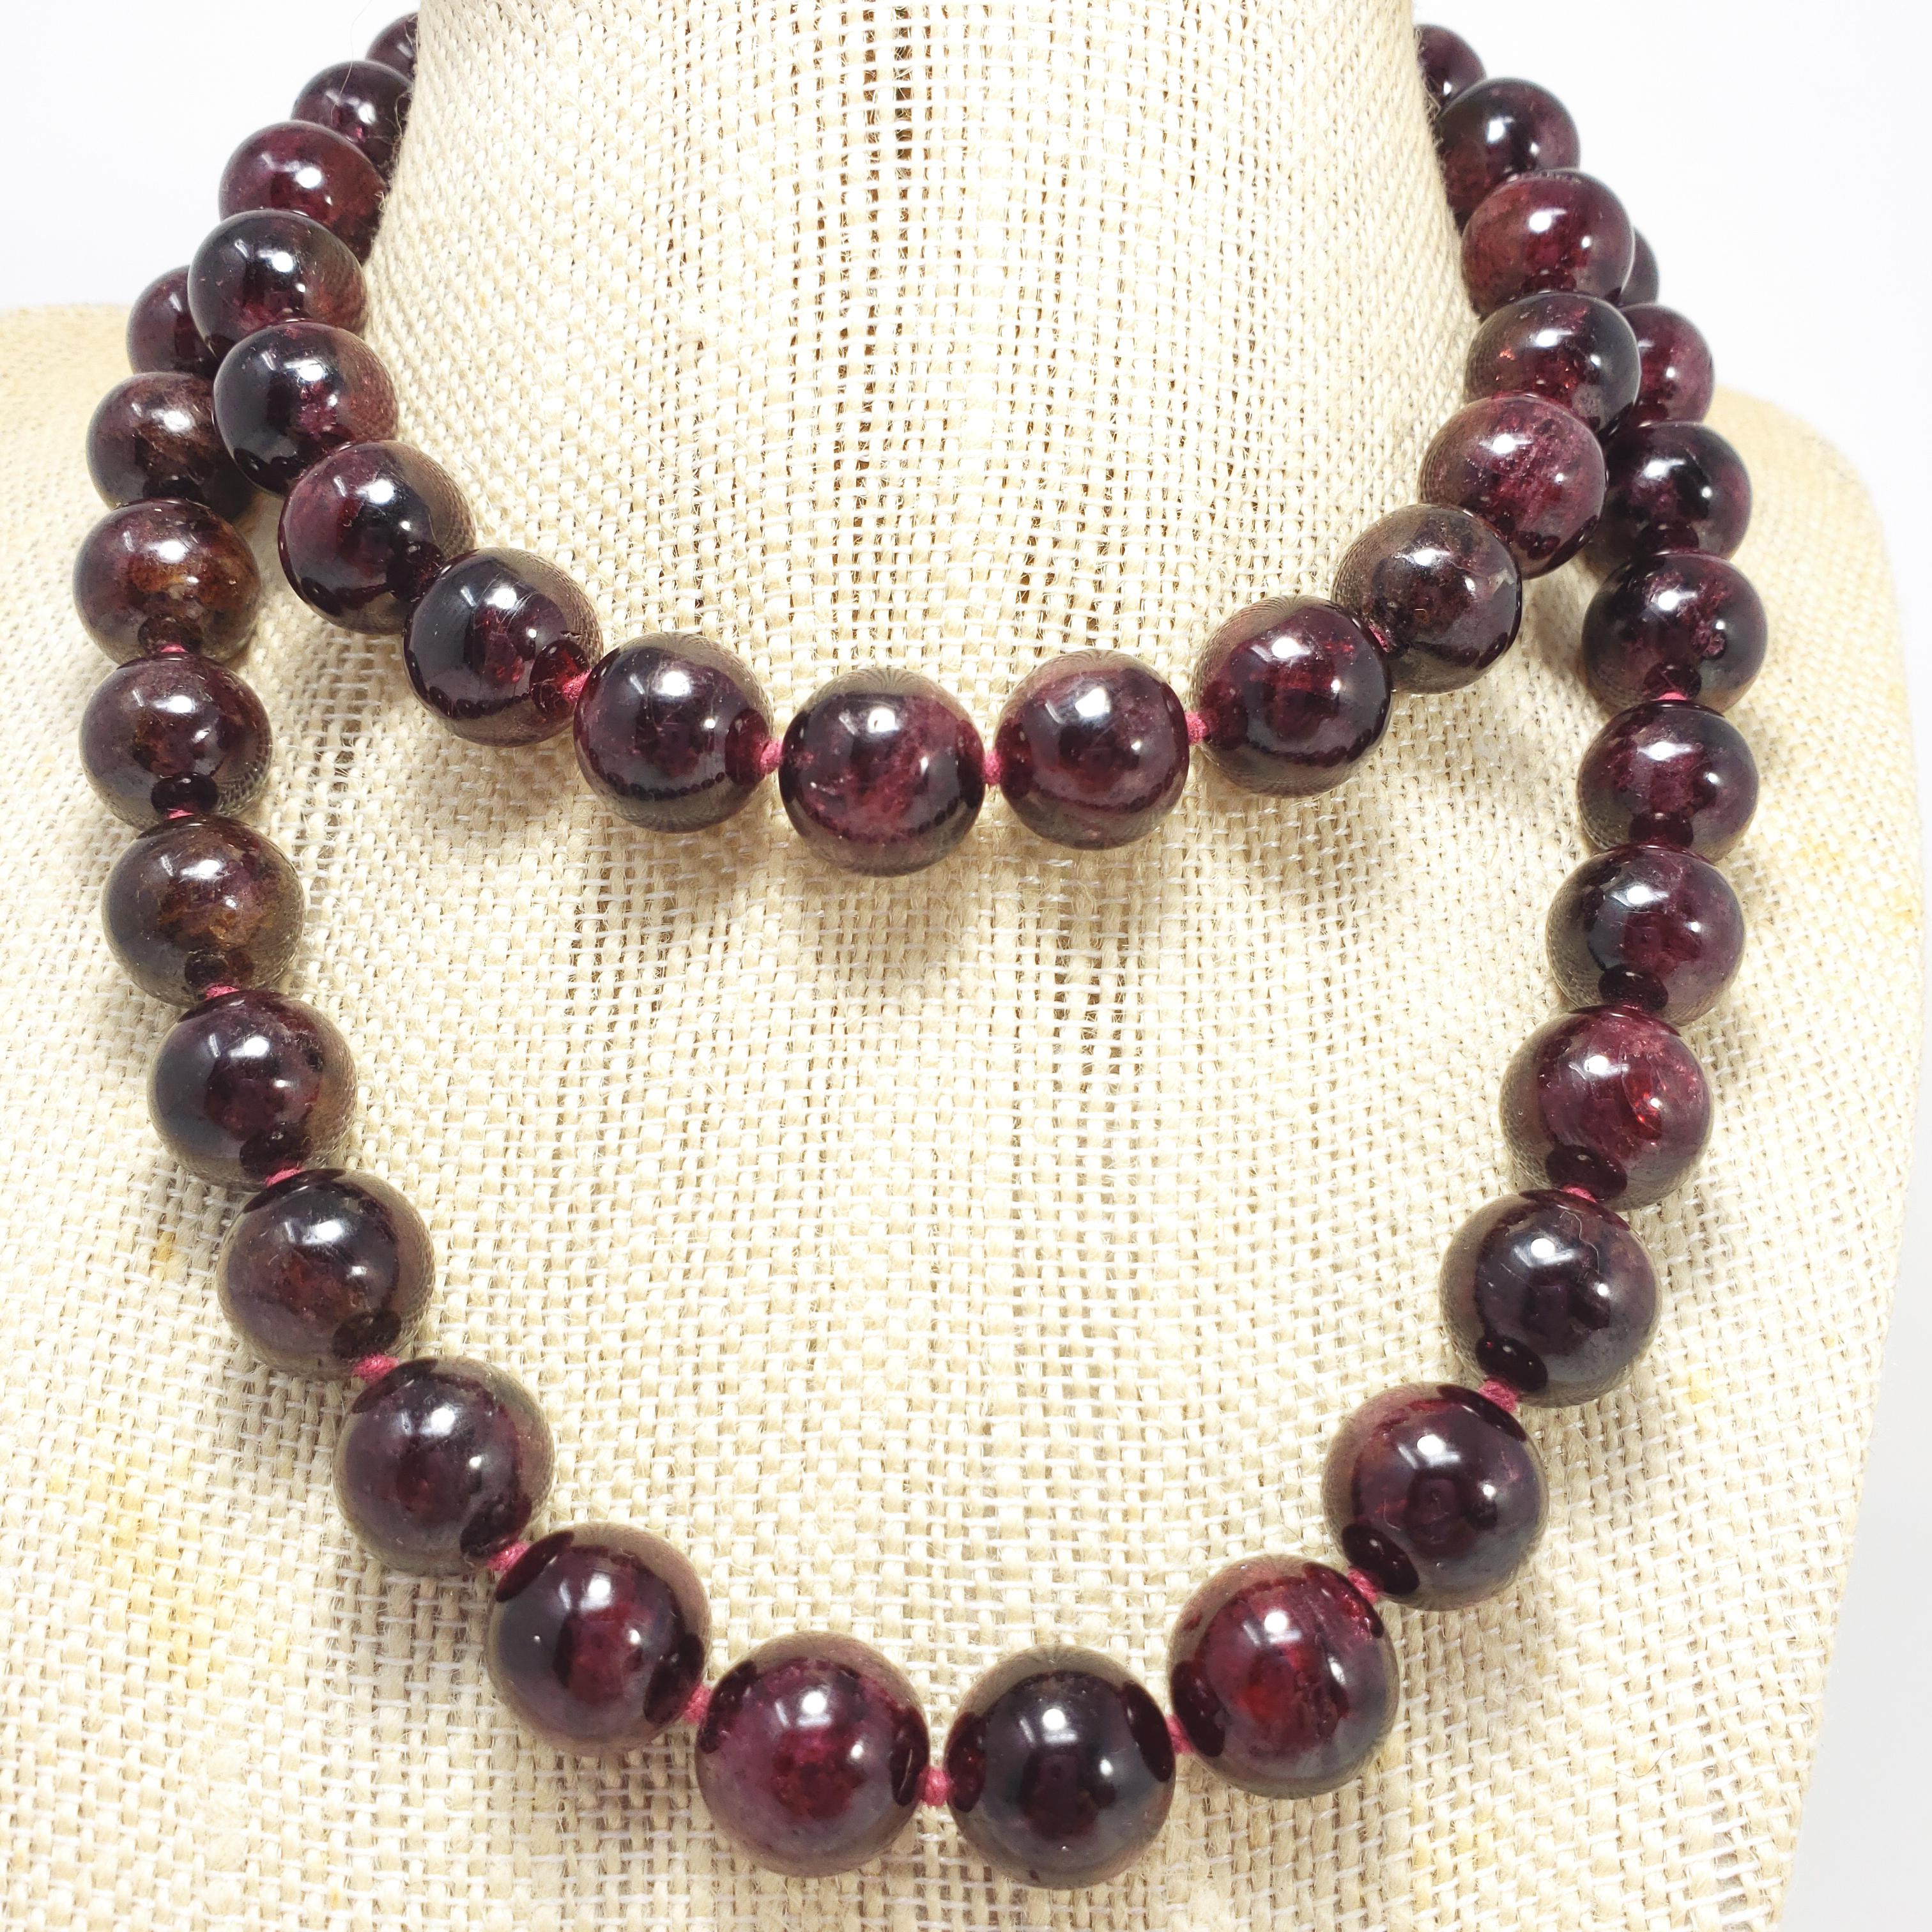 An exquisite necklace featuring polished garnet beads on a knotted string necklace. Fastened with a sterling silver S hook clasp. Bold, striking, dark color!

Bead diameter approx 12.5mm
Hallmarks: S 925